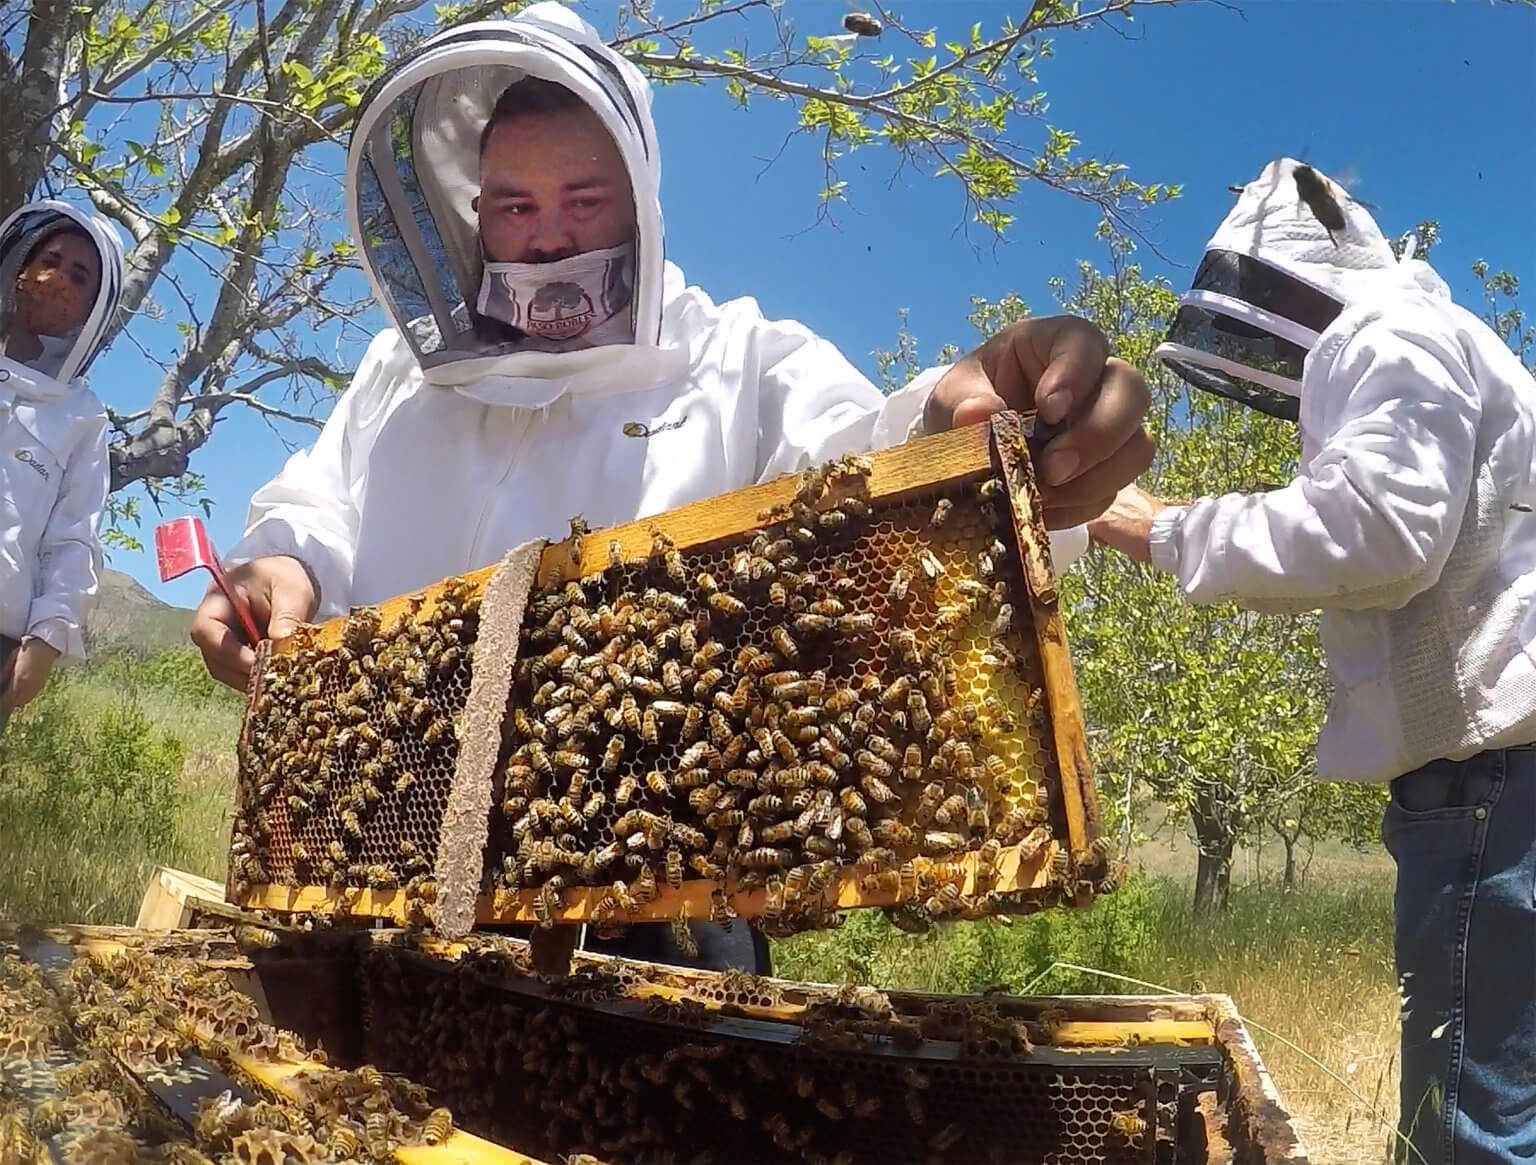 Javier Guerra working outdoors on beehive project